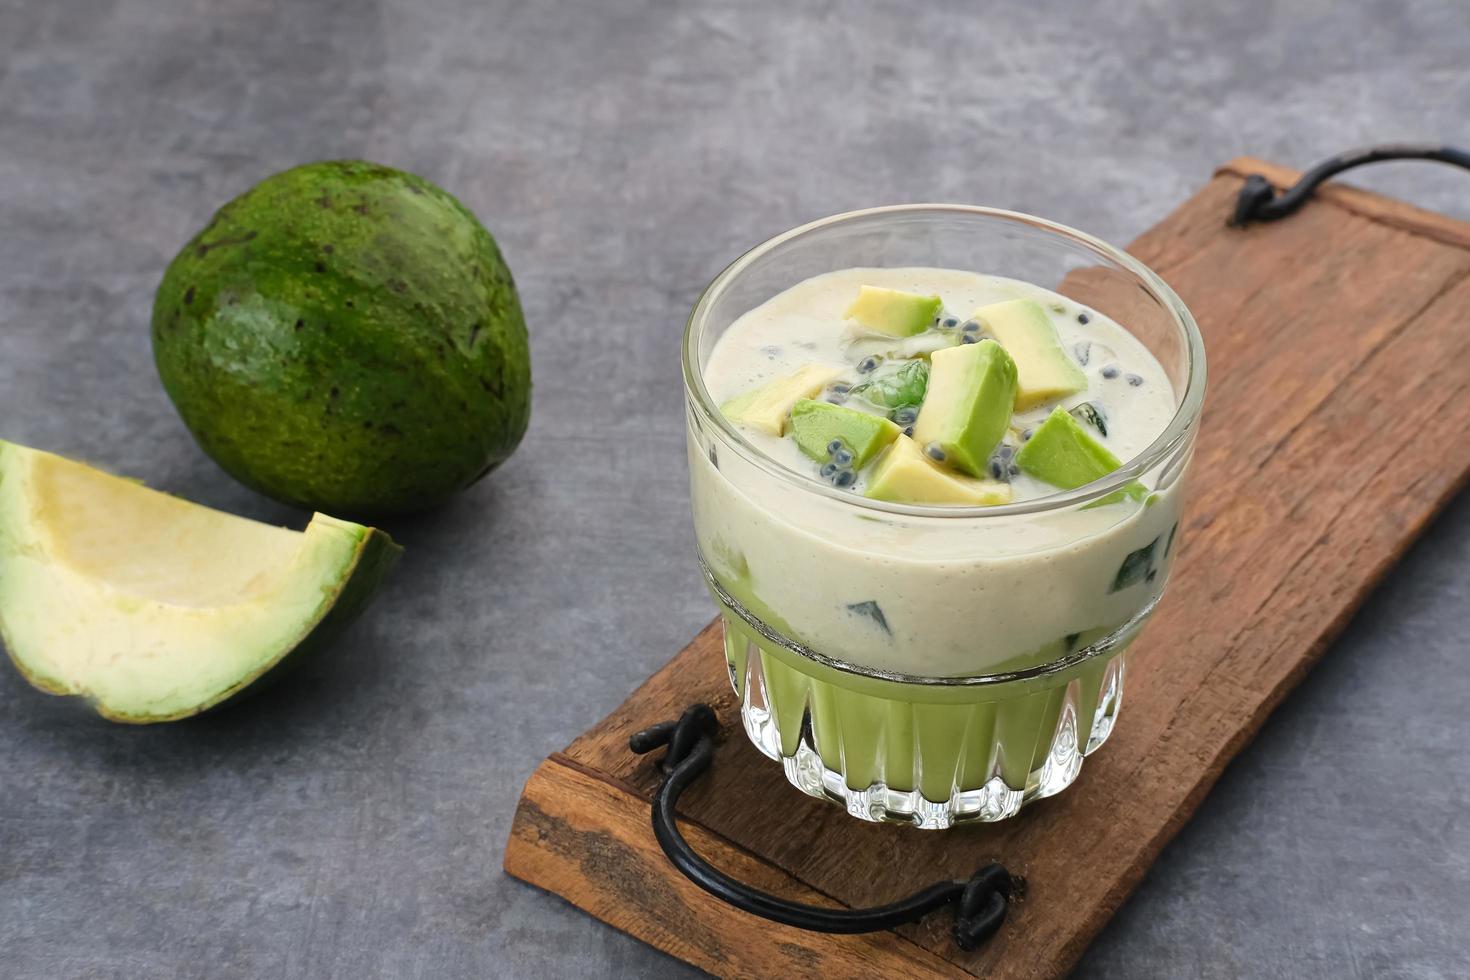 Avocado Milk Cheese Dessert is made from avocado, jelly, cheese, basil seeds, sweetened condensed milk and evaporated milk. Served in a glass. Space for text photo